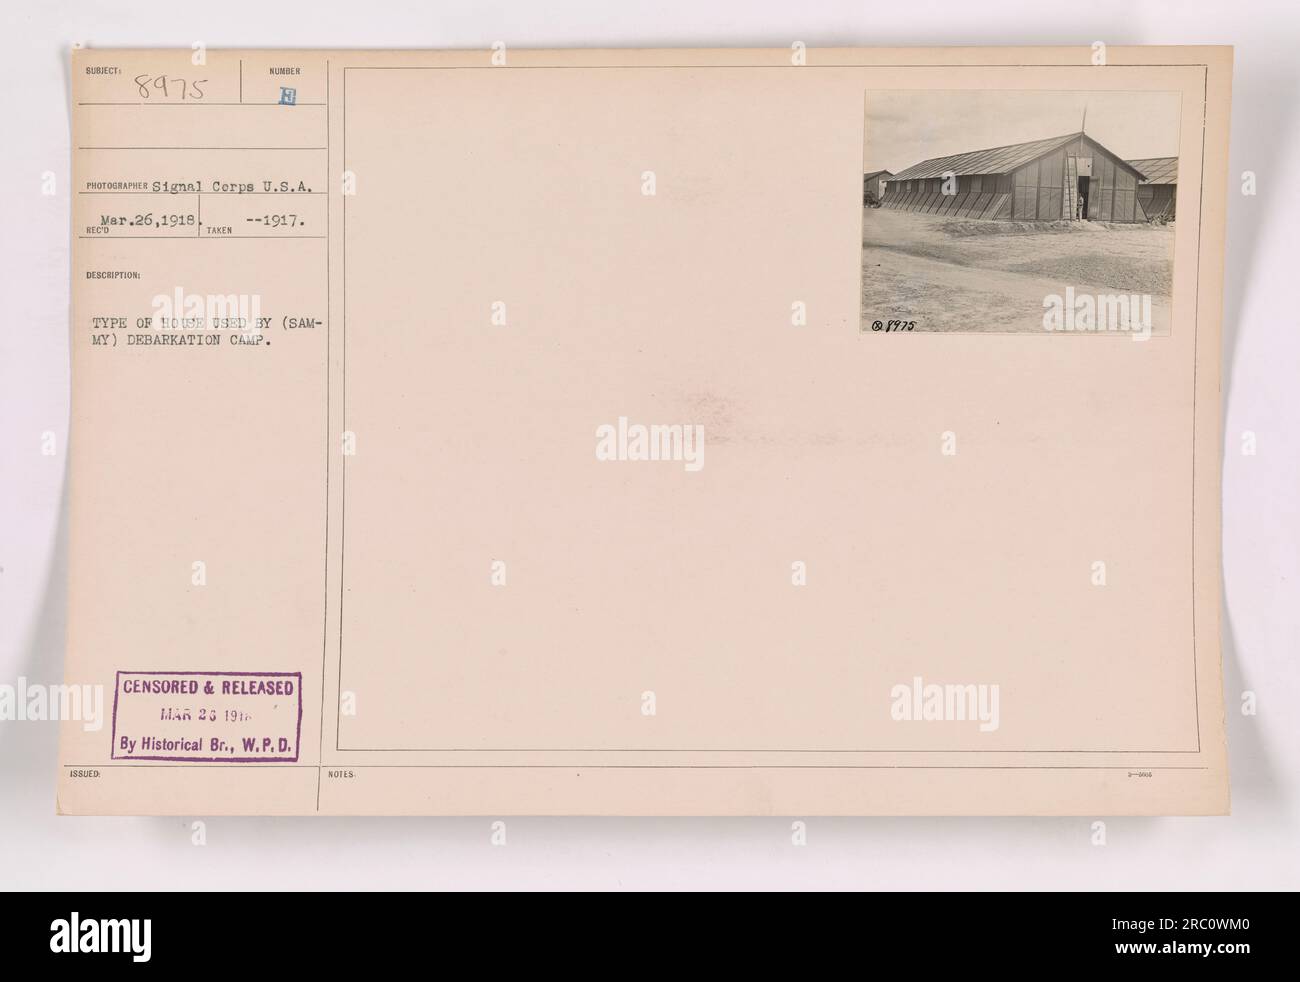 This photograph shows a type of house used by the debarkation camp SUBIECT 8975 during World War One. The house appears to be made of wood and has a simple design. The image was taken in 1917 by a photographer from the Signal Corps U.S.A. It was censored and released on March 23, 1918, by the Historical Branch, W.P.D. Numbered as 111-SC-8975. Stock Photo